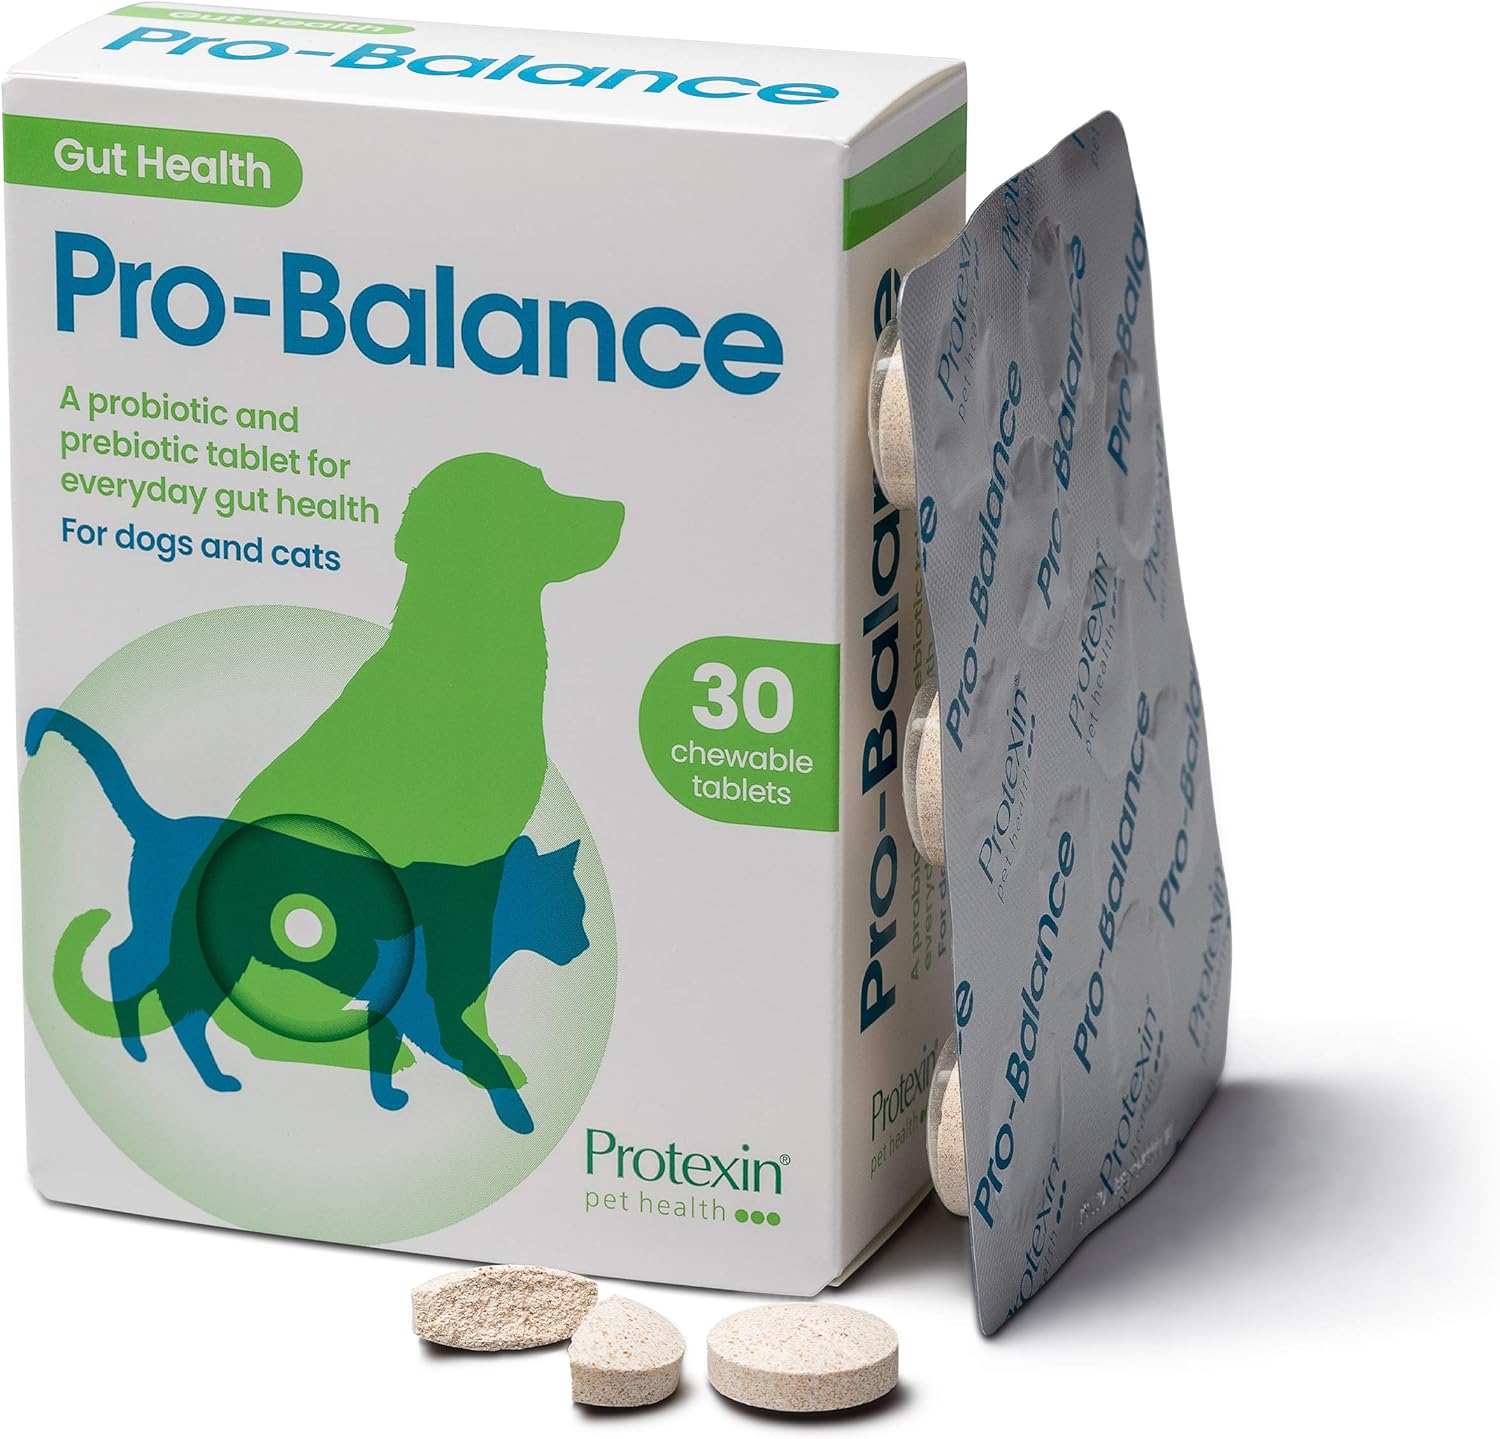 Protexin Pet Health Pro-Balance Probiotic for Dogs and Cats – Daily Chewable Probiotic and Prebiotic Tablet for Digestive Health Support – Pack of 30 :Pet Supplies